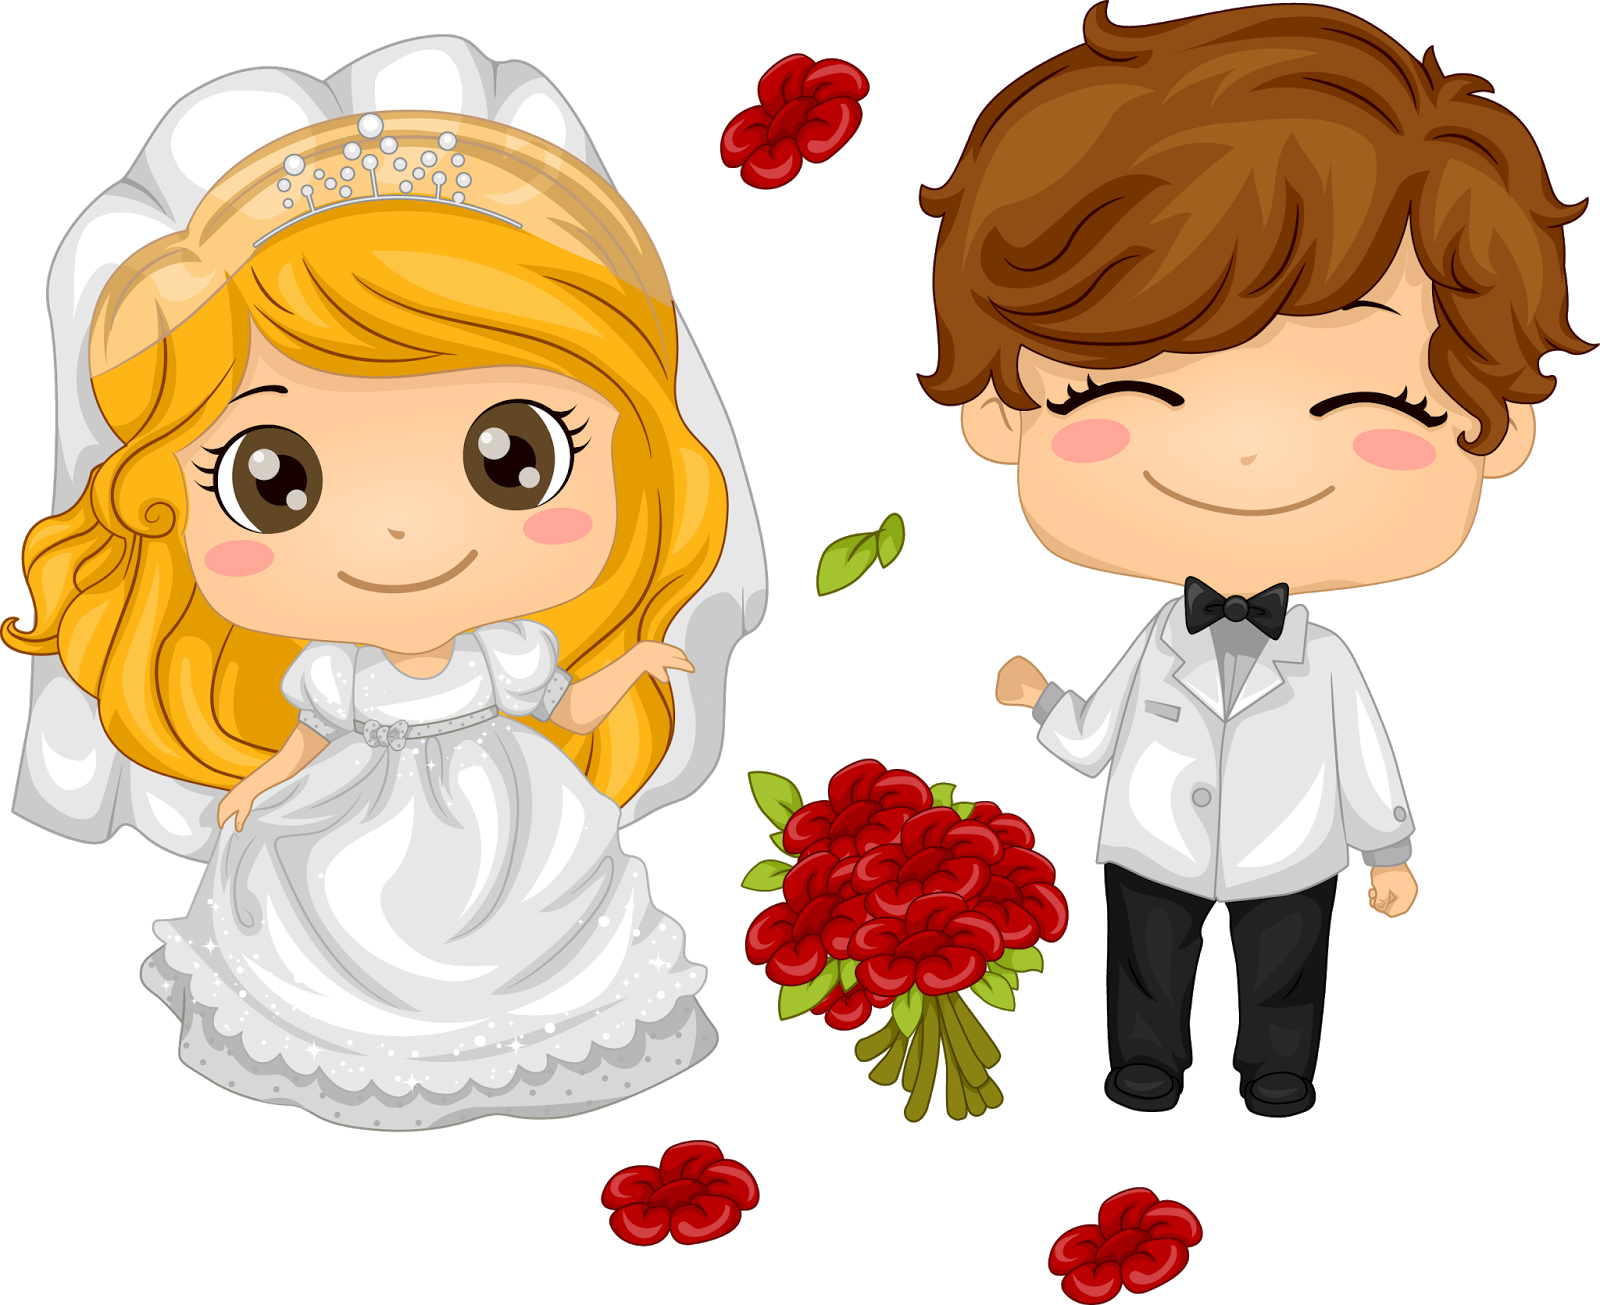 Download Free Download Bride And Groom Cartoon Clipart Wedding - Bride And  Groom Cartoon PNG Image with No Background 